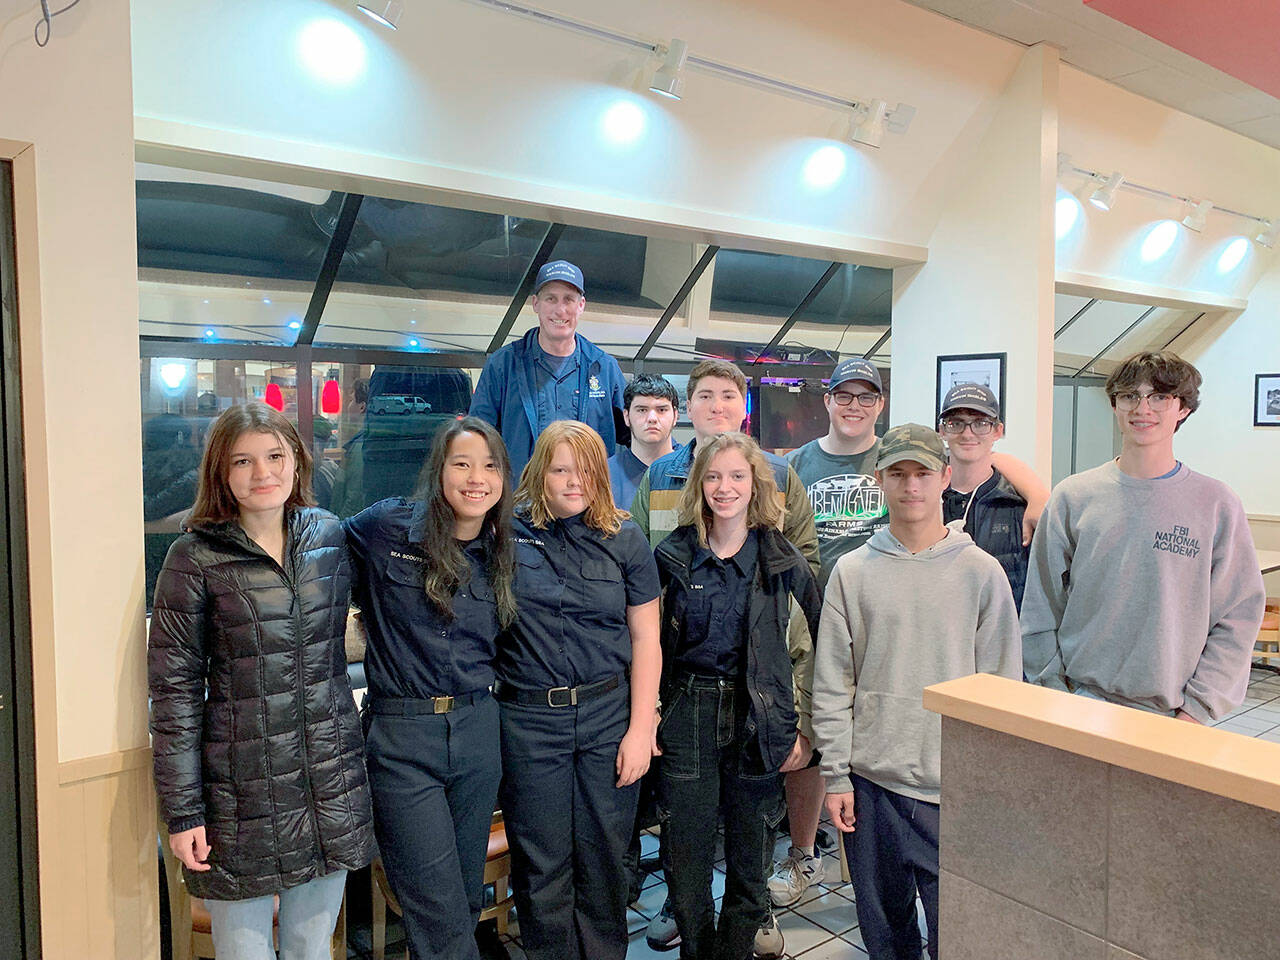 Pictured in the front row, from left to right are Bella Sains, Ana Gustafson, Leyla Price, Brenna Murphy, Michael Aranda and Andrew Corson. Back row, left to right are Sea Scout leader Jared Minard, Elliot Dahlin, Rynn Hays, Adian Carlquist-Bundy and Michael Rodgers. Not pictured are Dean Spaulding, Ella Schulz, Ozzy Minard and Jonathan Bridges.